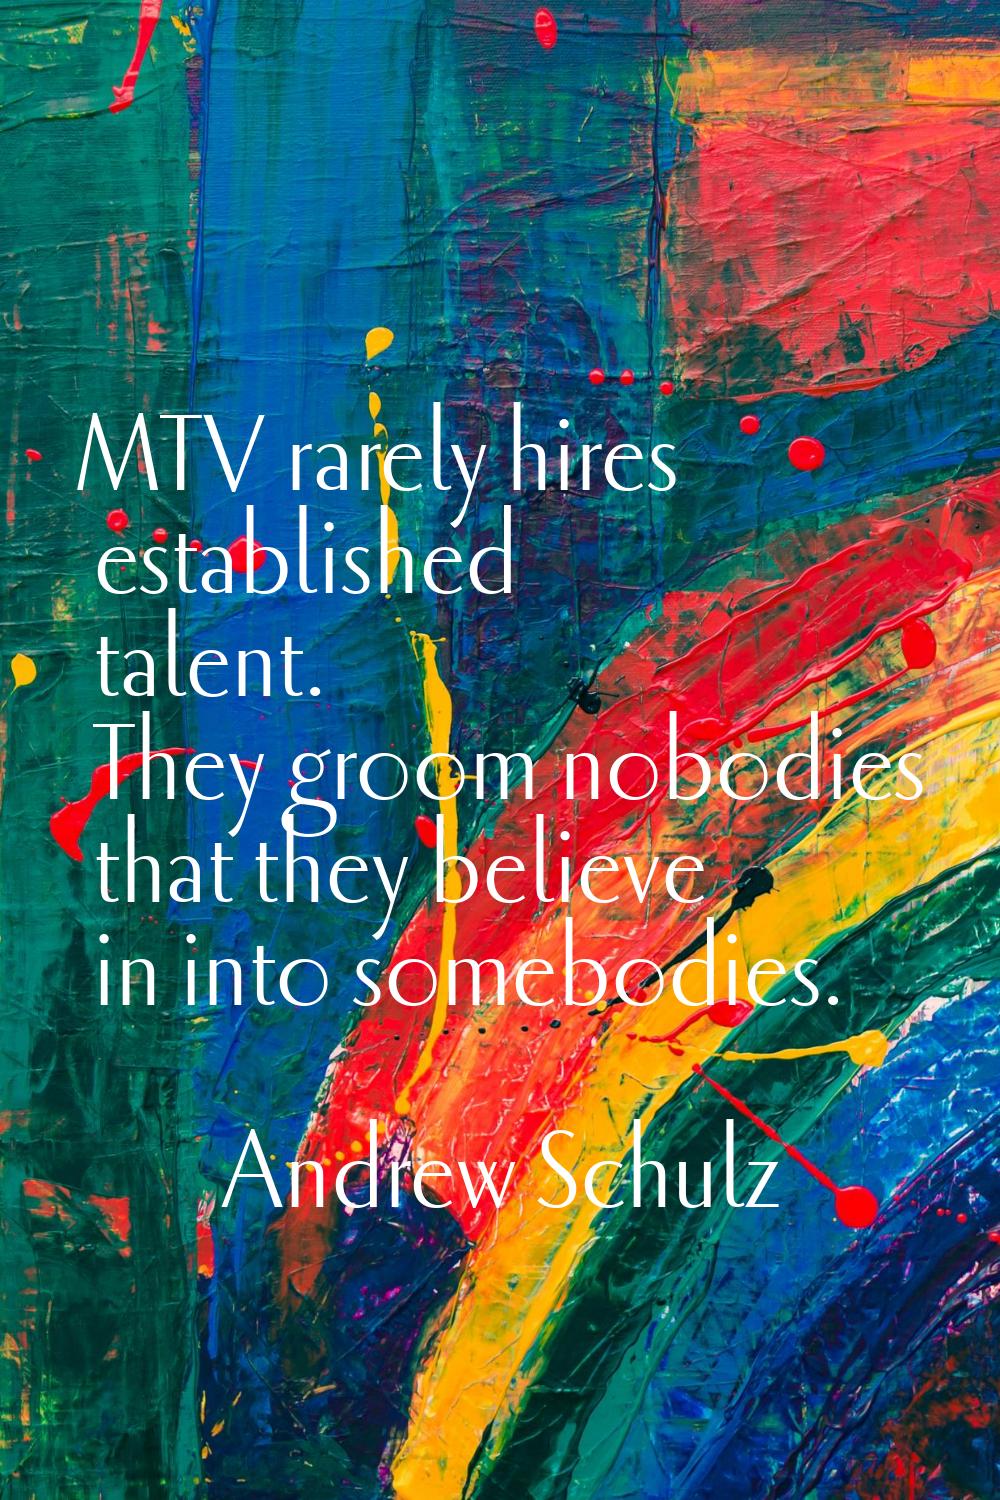 MTV rarely hires established talent. They groom nobodies that they believe in into somebodies.